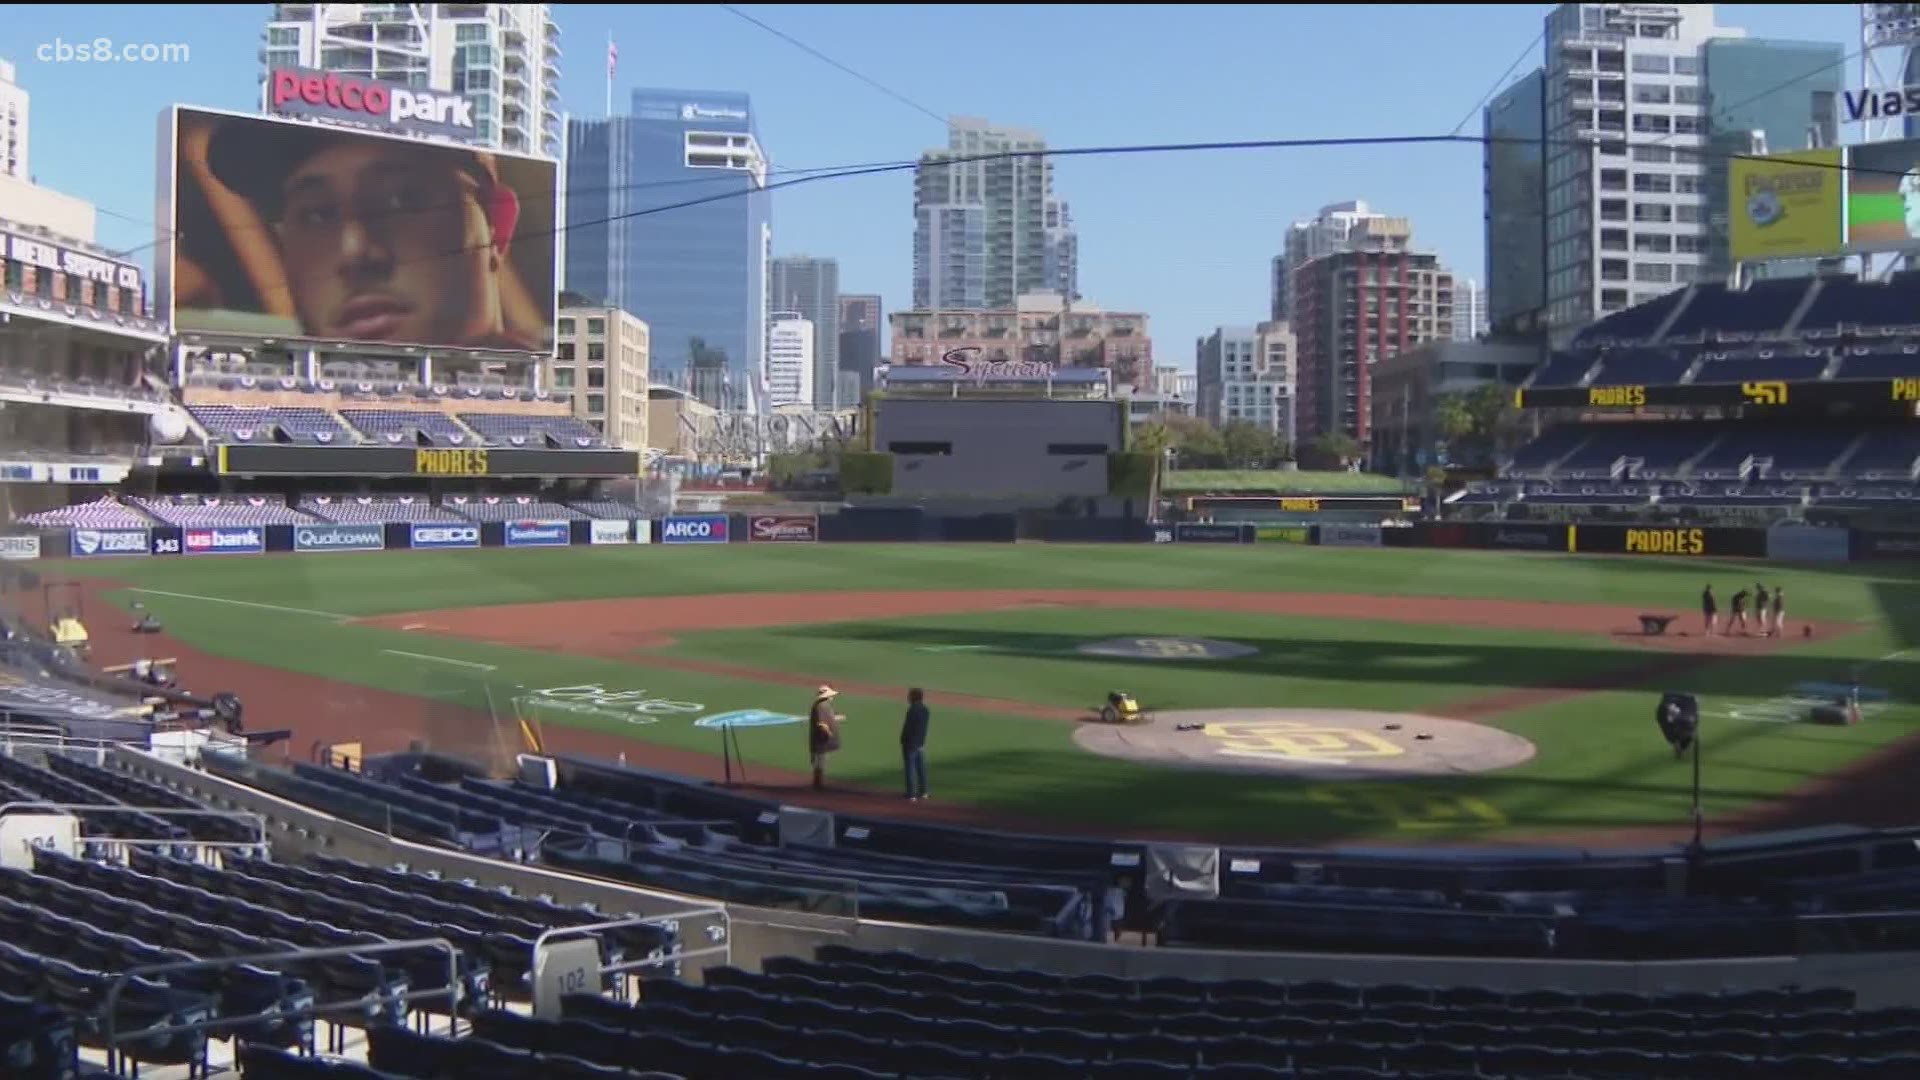 Full capacity, masks requirements lifted for fully vaccinated fans, added promotions at Petco Park and bars are prepping as much as they can for the crowds.